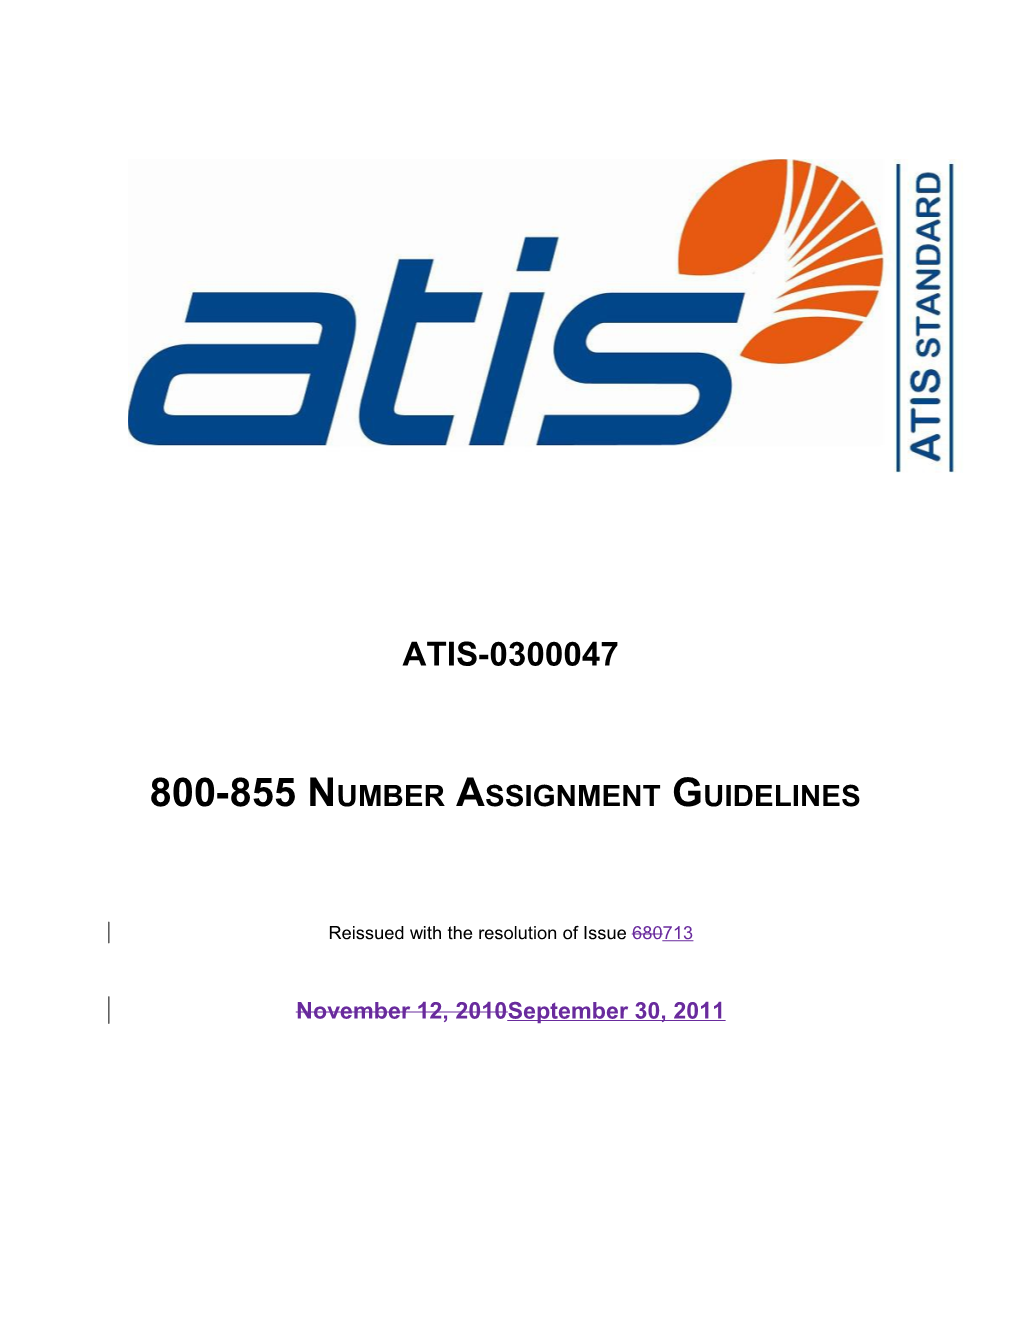 800-855 Number Assignment Guidelines